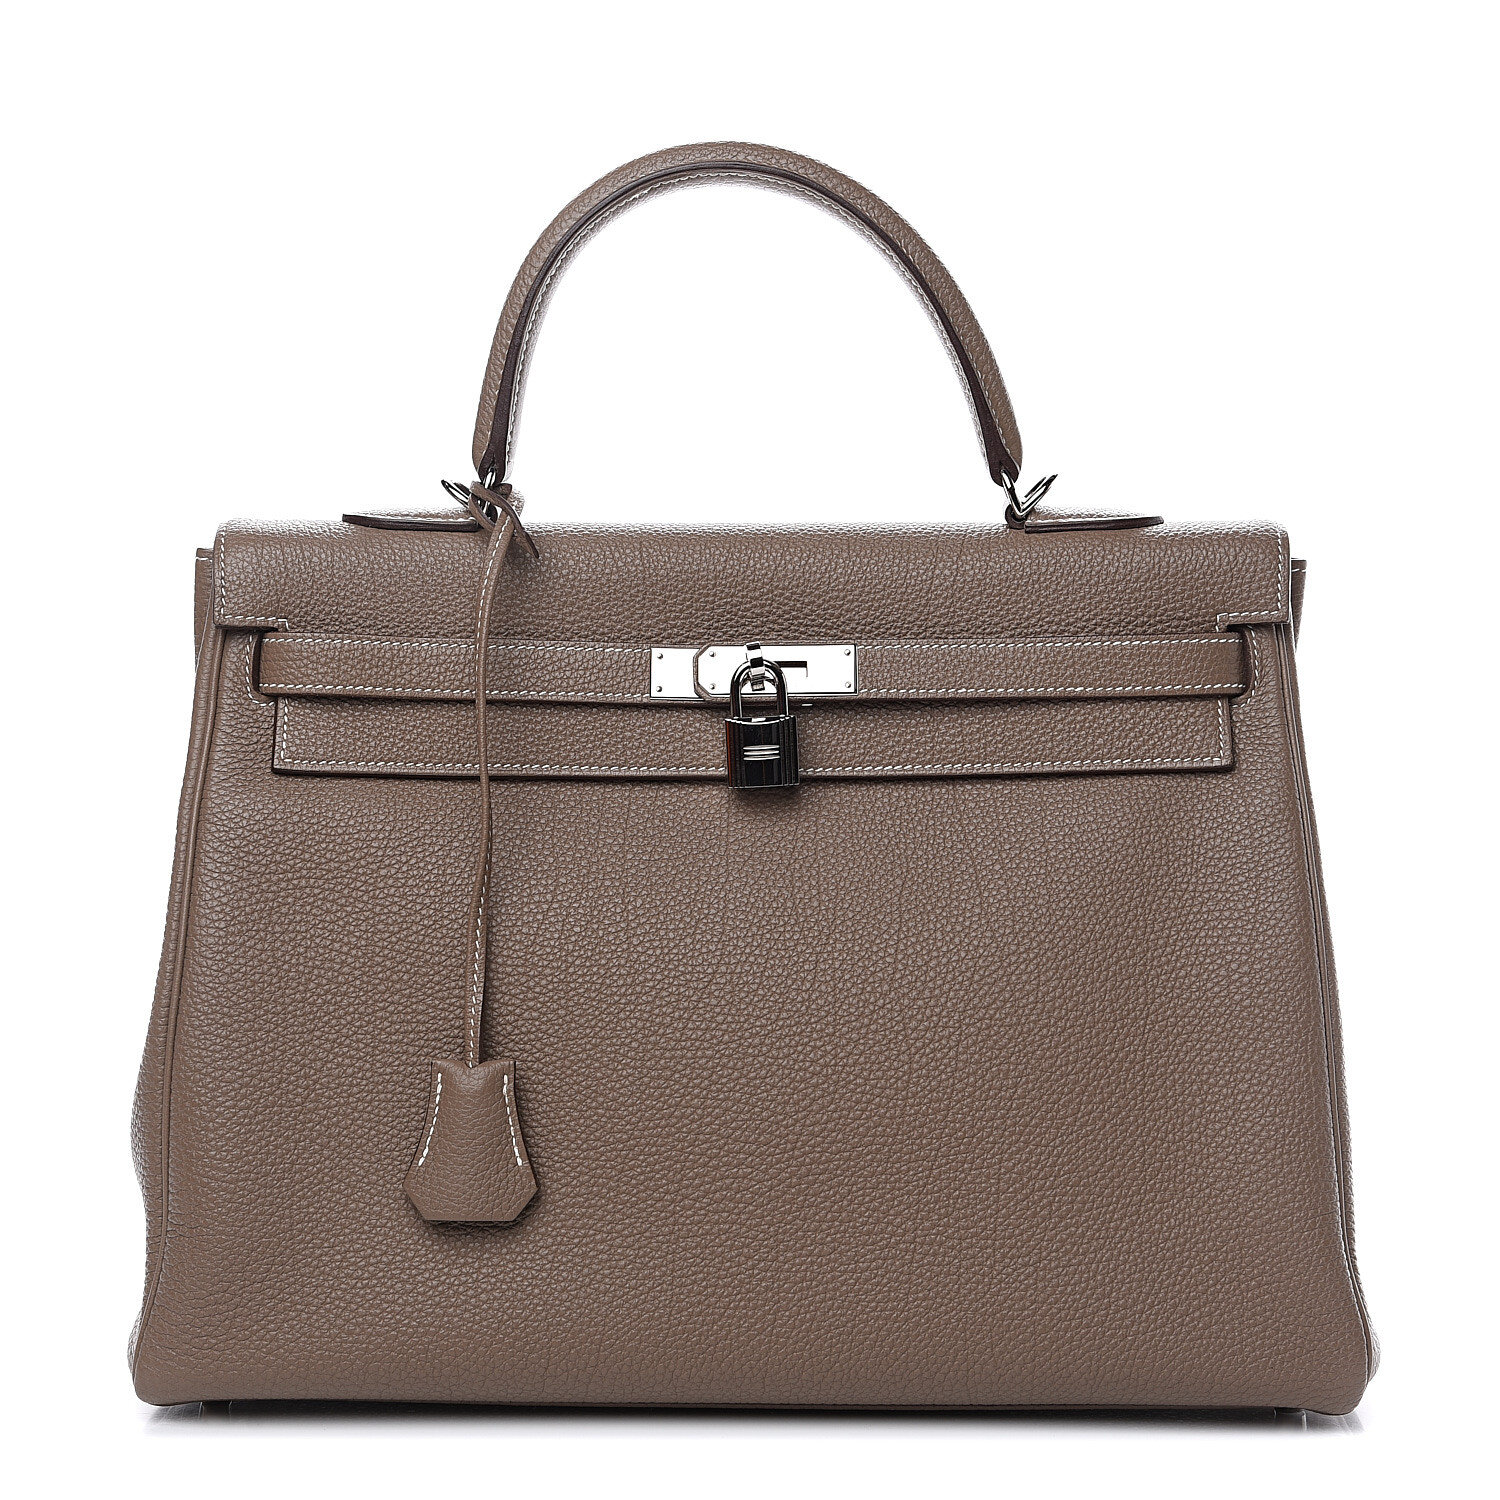 hermes-togo-kelly-retourne-35-etoupe-Available-For-Sale-Collecting-Luxury-1.jpg